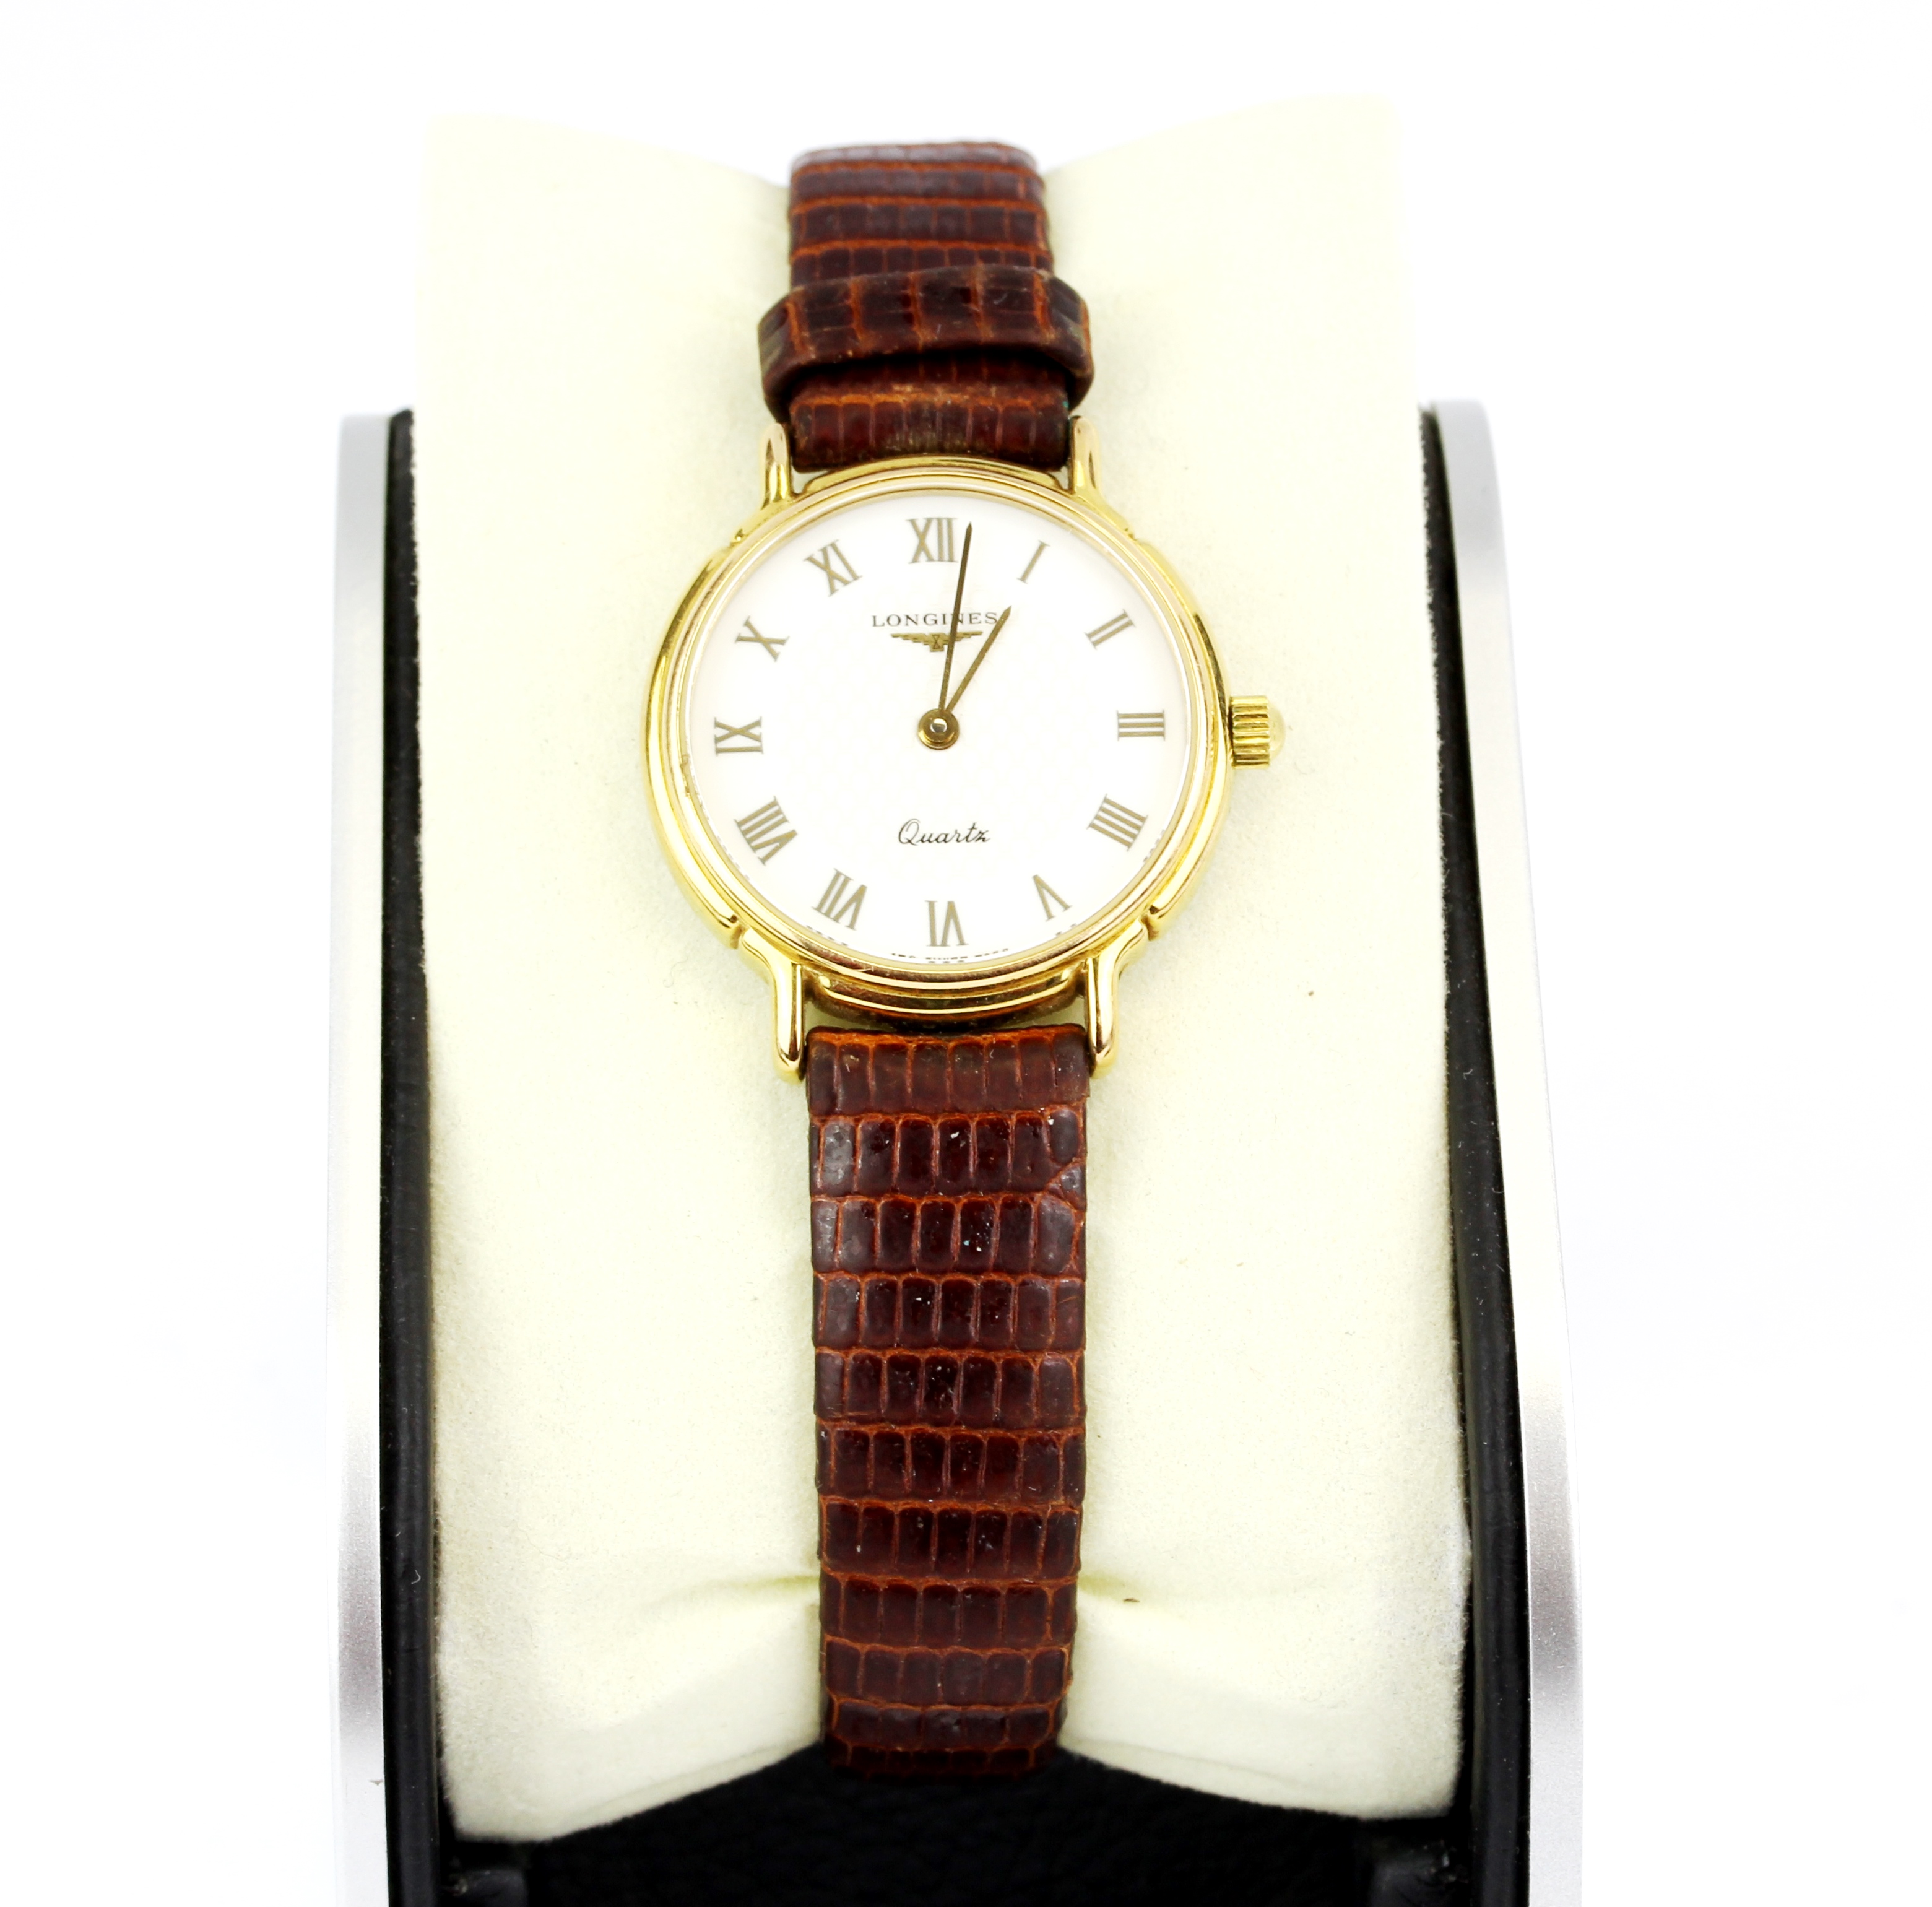 A Longines gold plated wristwatch (no. 24445181 7044) on a brown leather strap. - Image 5 of 5